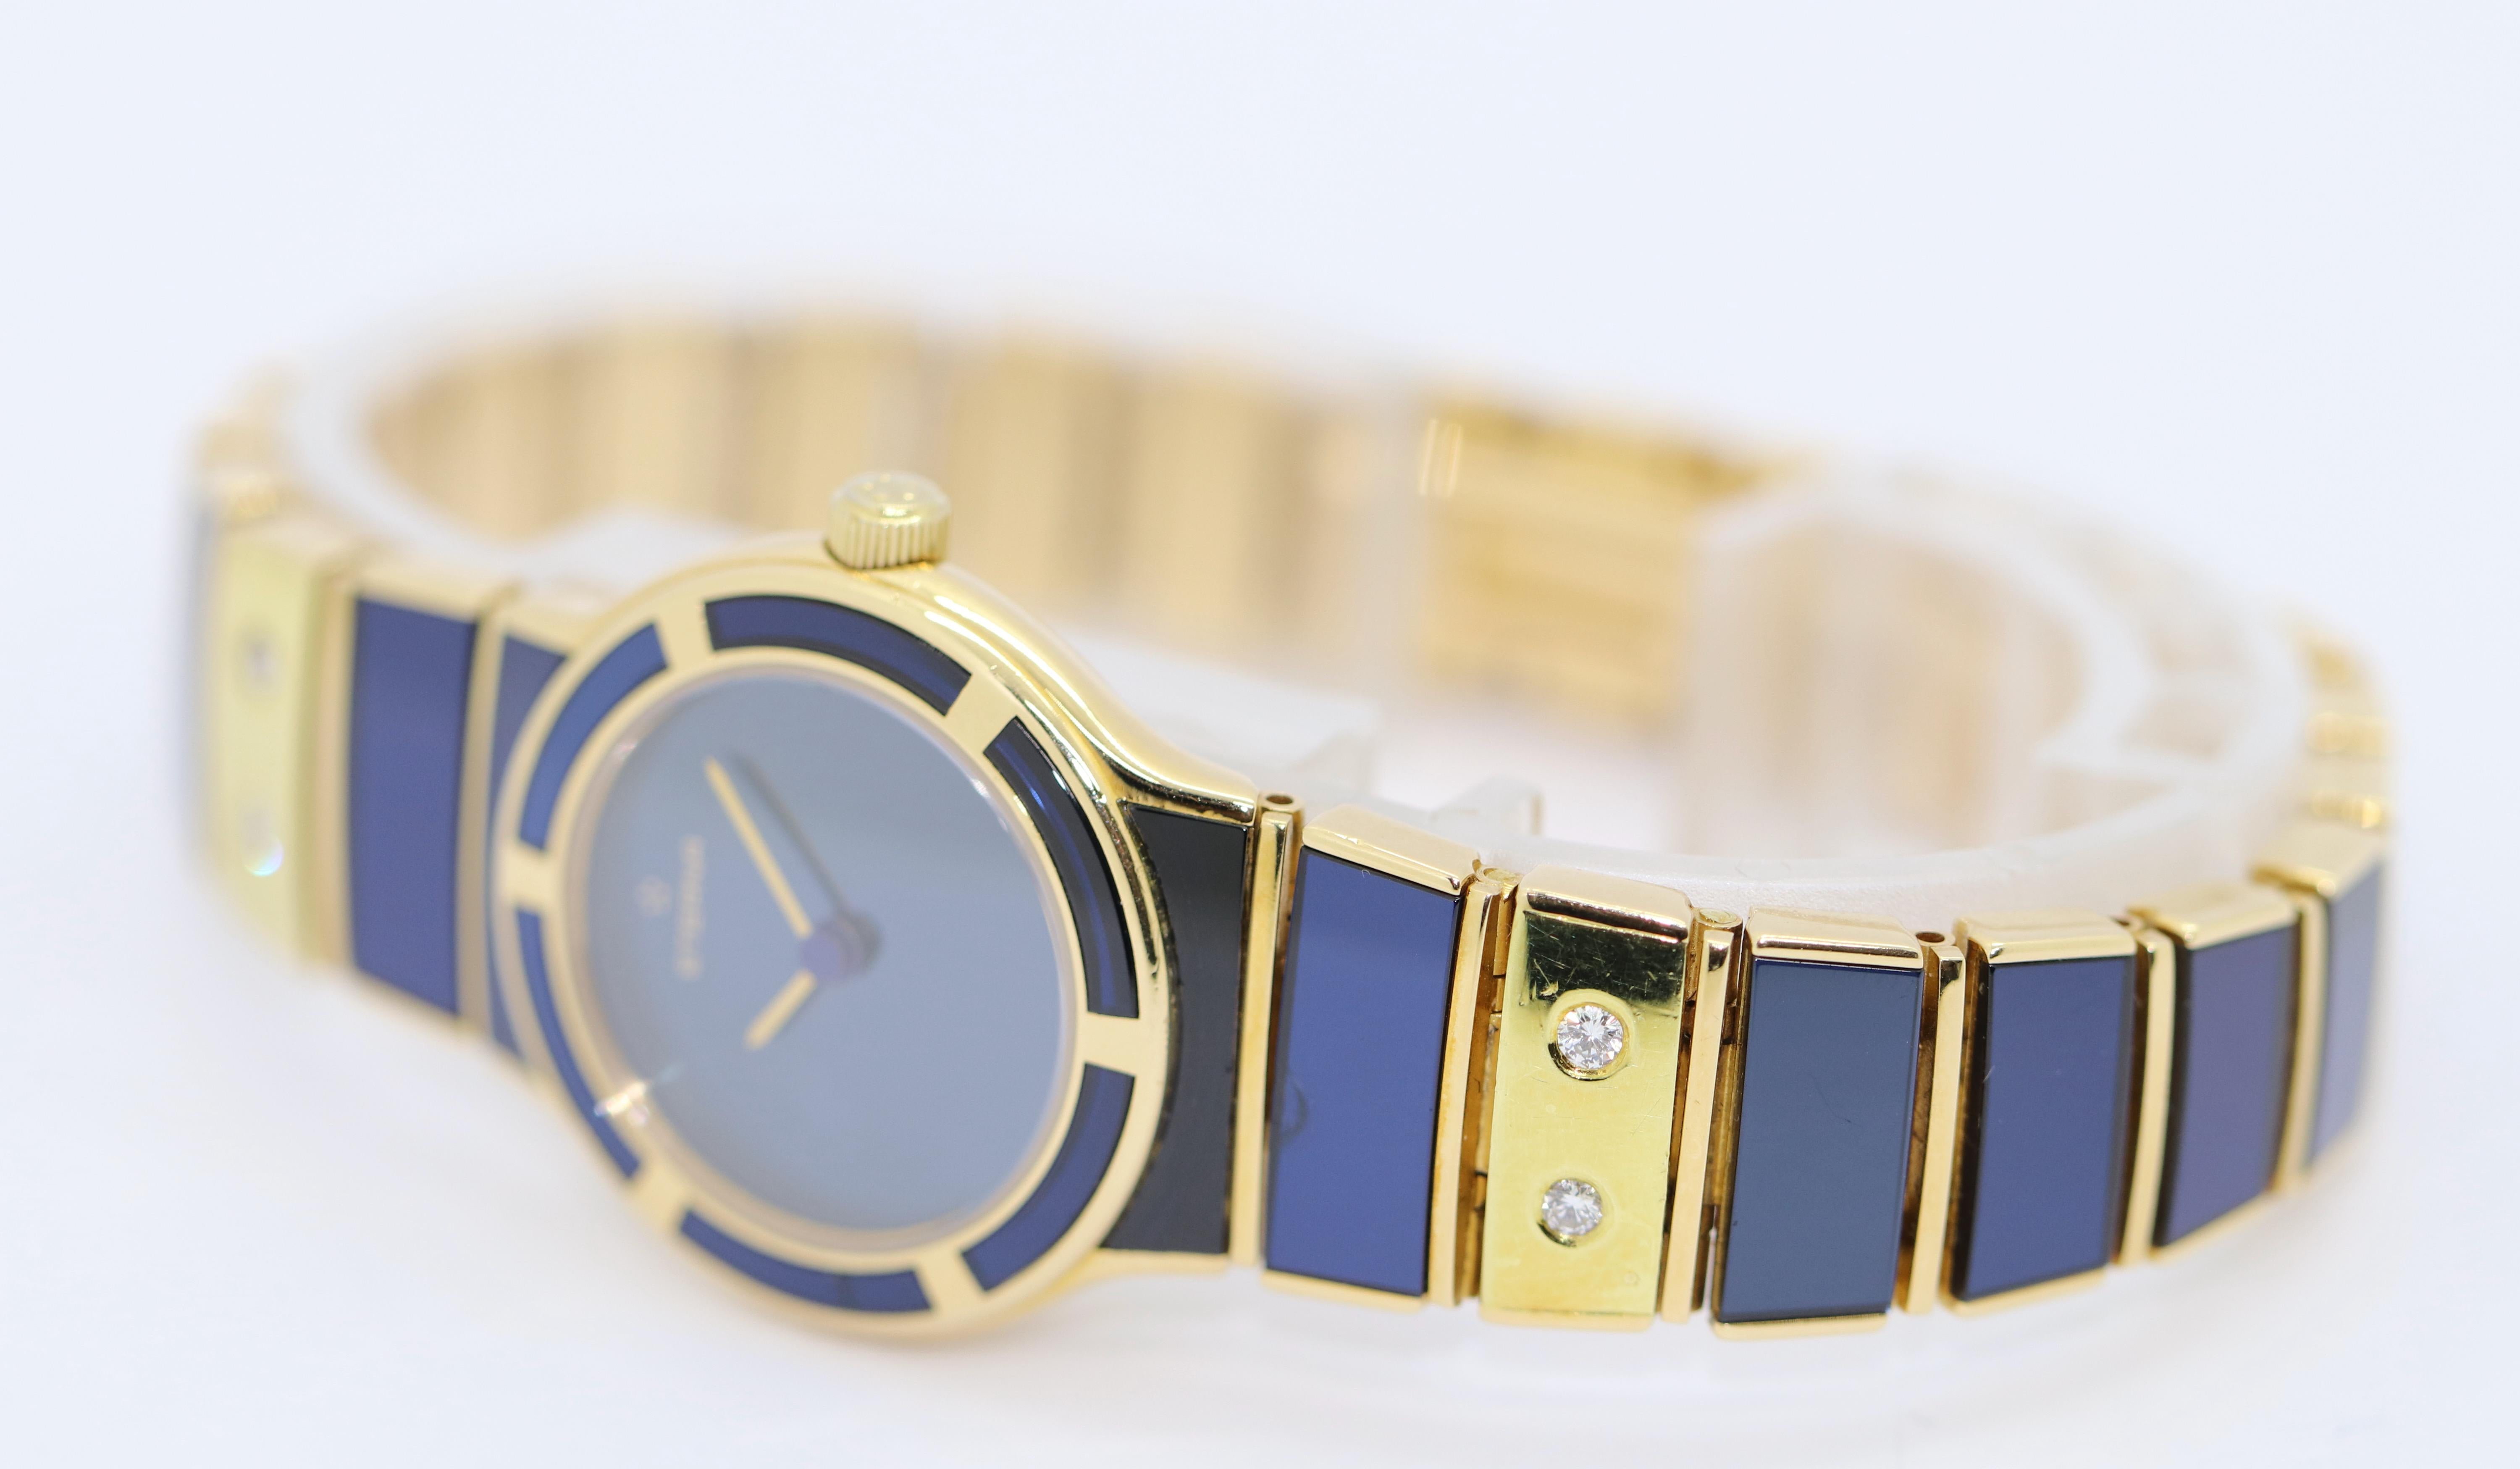 Round Cut Limited 18 Karat Gold Ladies Wrist Watch by Eterna, Model Galaxis, Number 007 For Sale